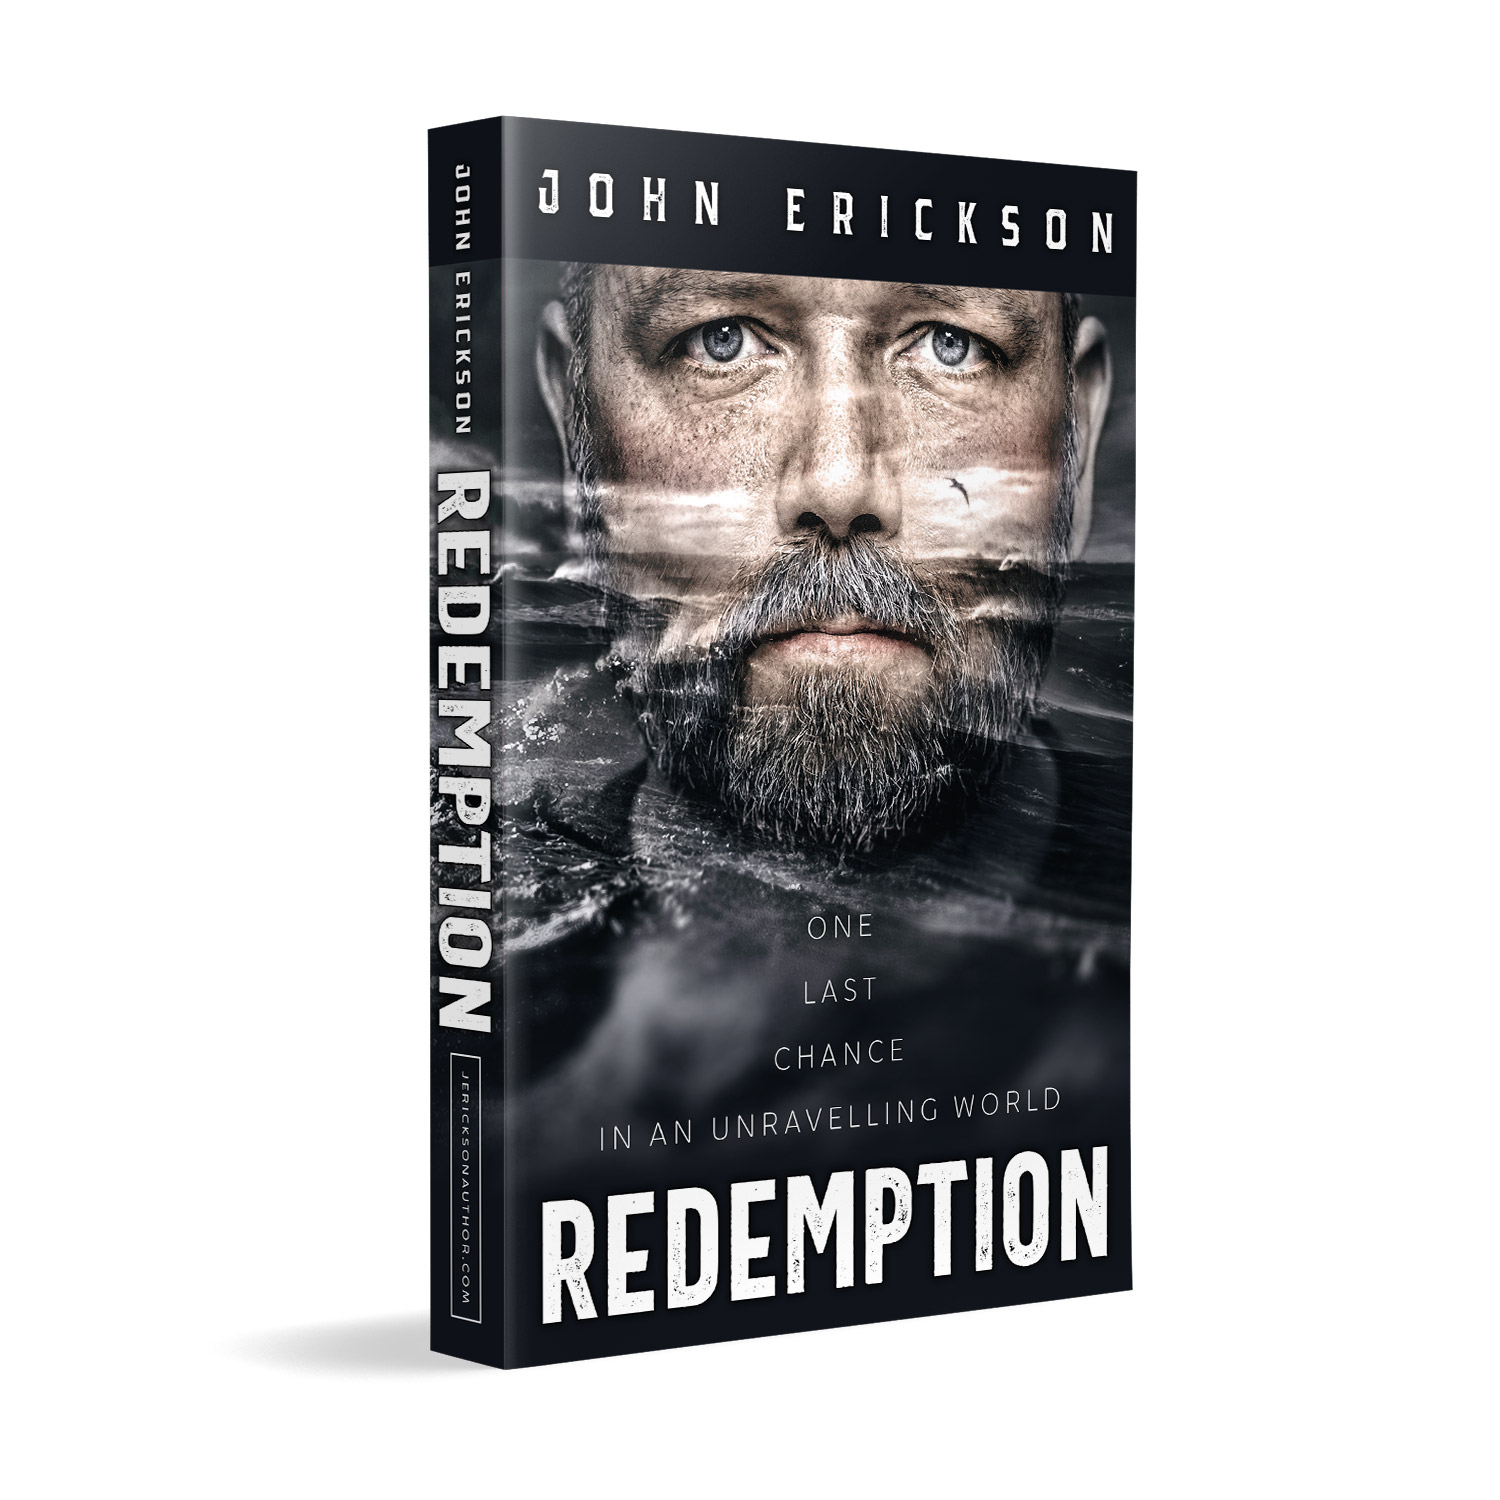 'Redemption' is a unique thriller novel by debut author, John Erickson. The book cover and interior were designed by Mark Thomas, of coverness.com. To find out more about my book design services, please visit www.coverness.com.